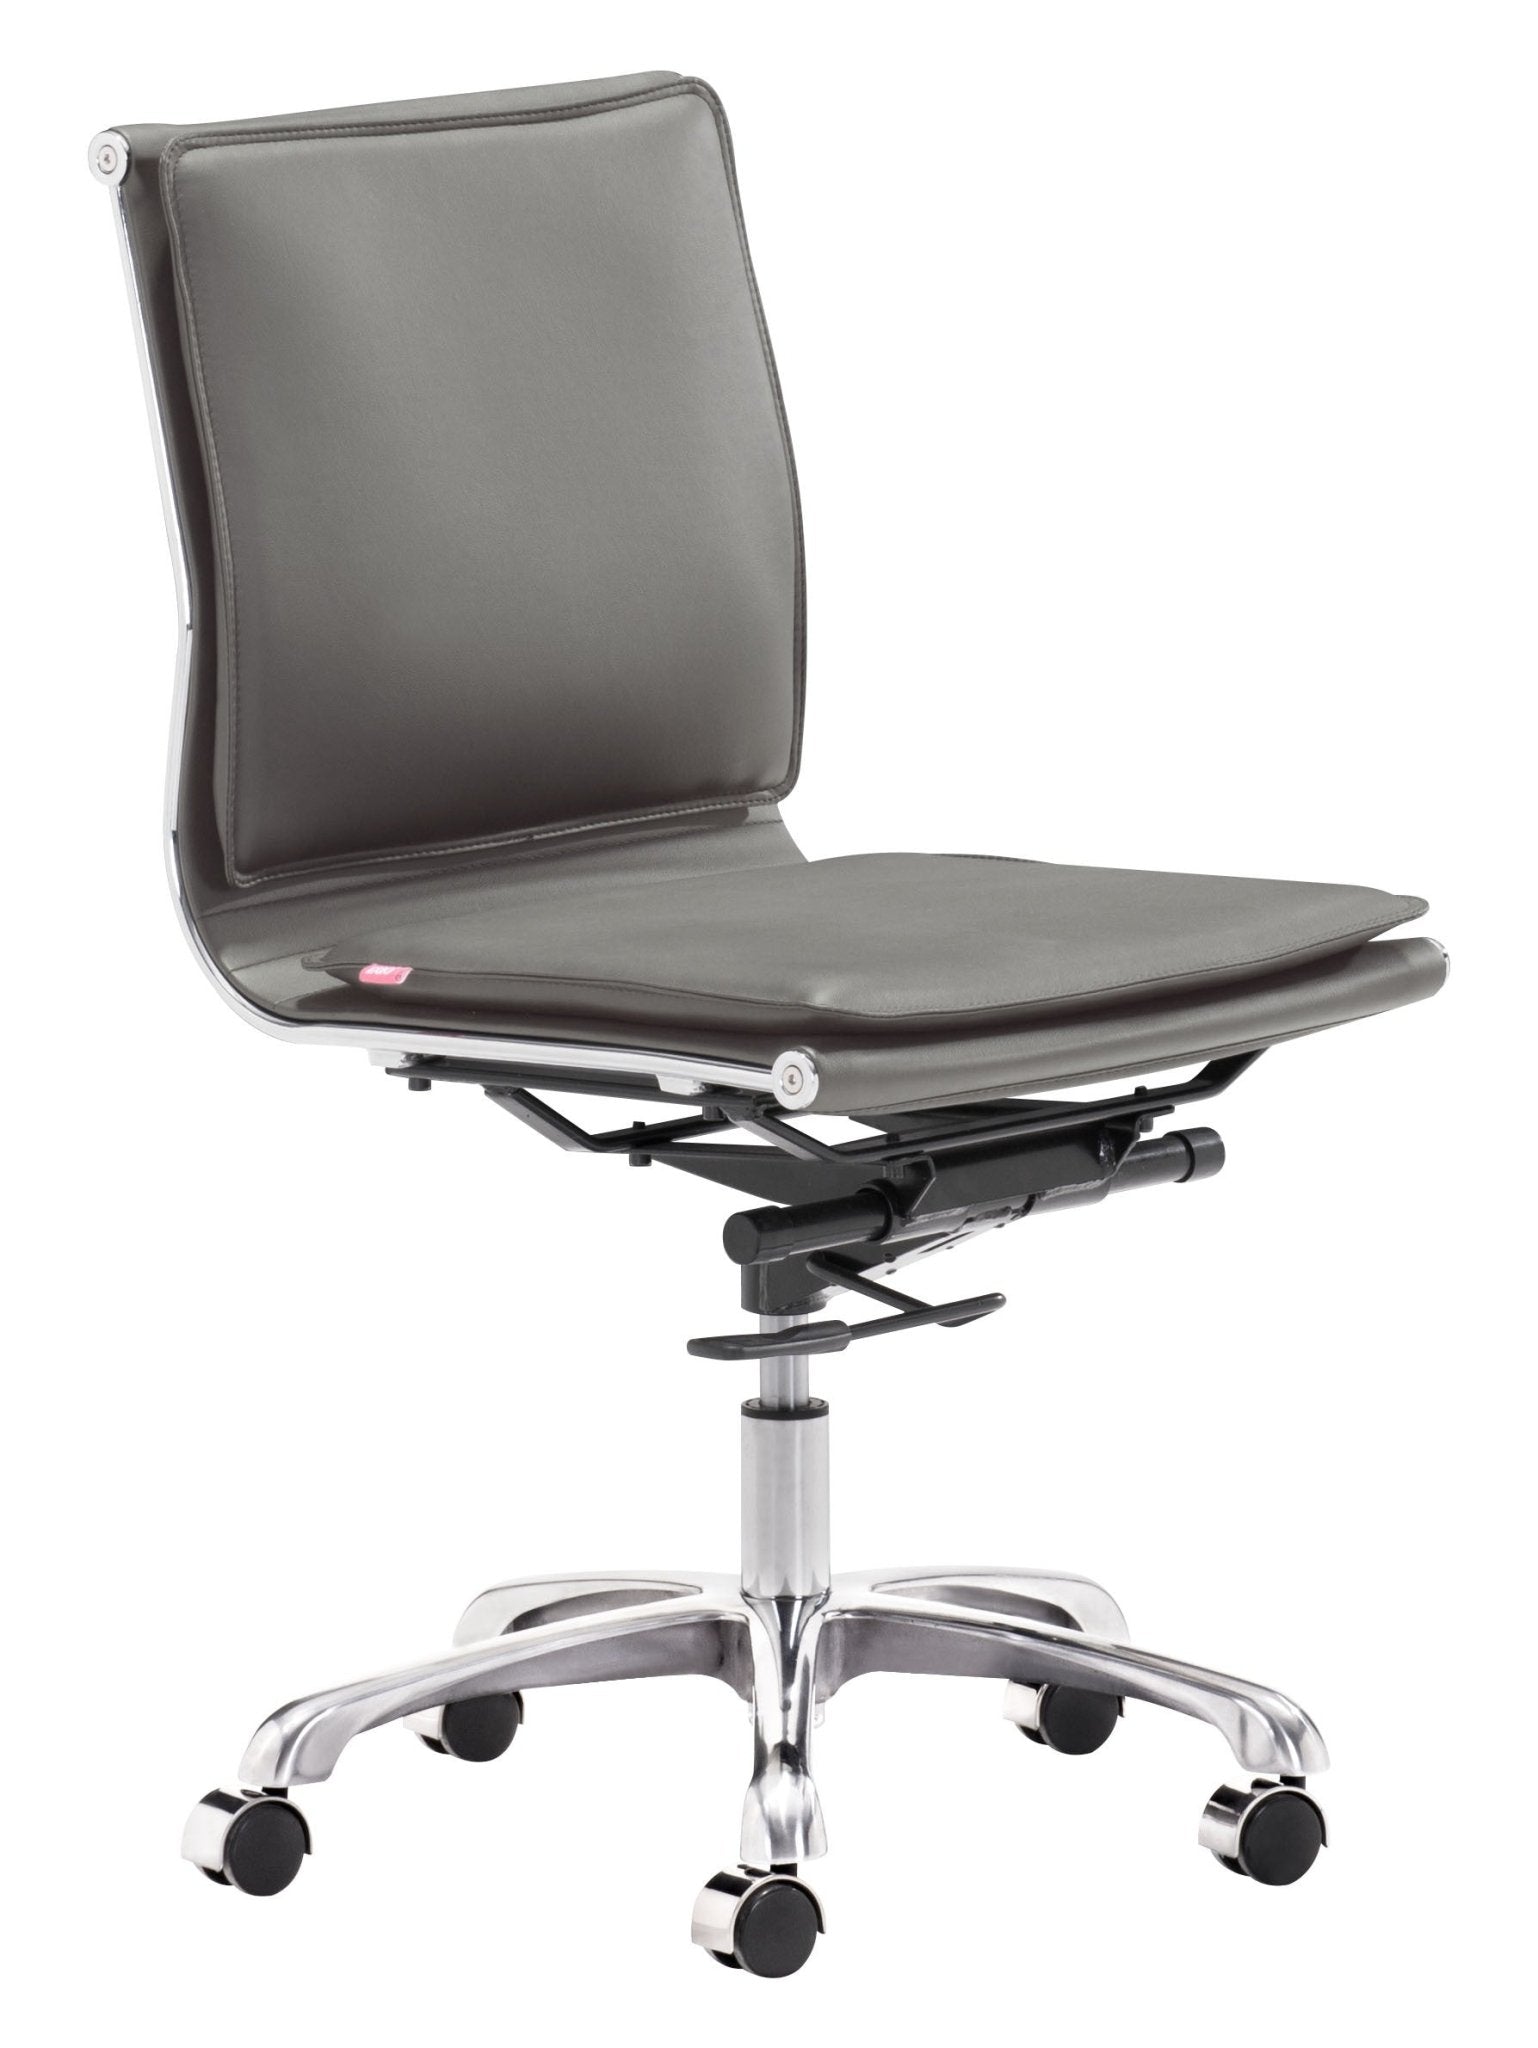 Gray and Silver Adjustable Swivel Metal Rolling Executive Office Chair - Tuesday Morning-Office Chairs